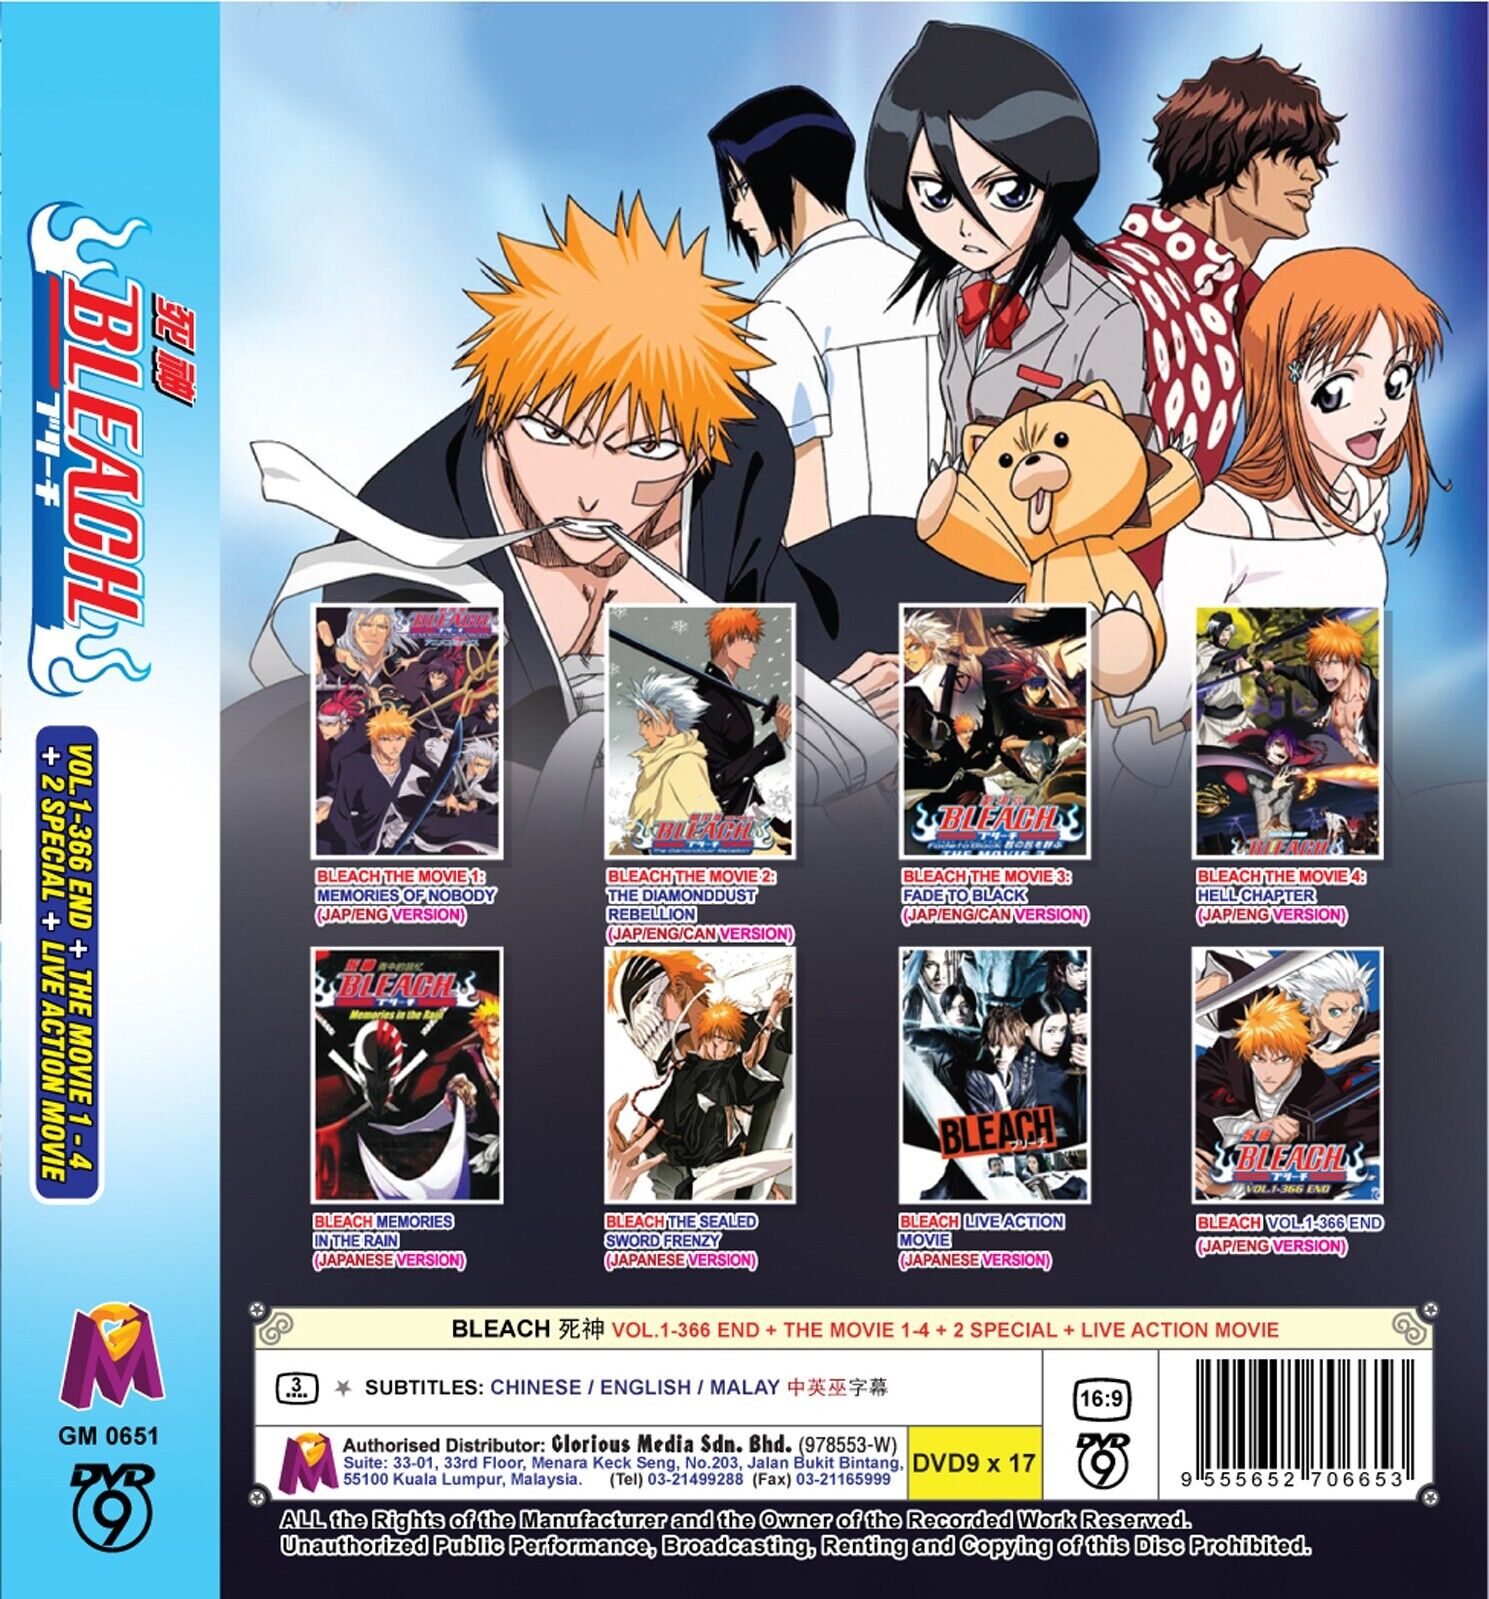 Bleach Vol. 1-366 End + Movie + Special + Live Full Collection Box